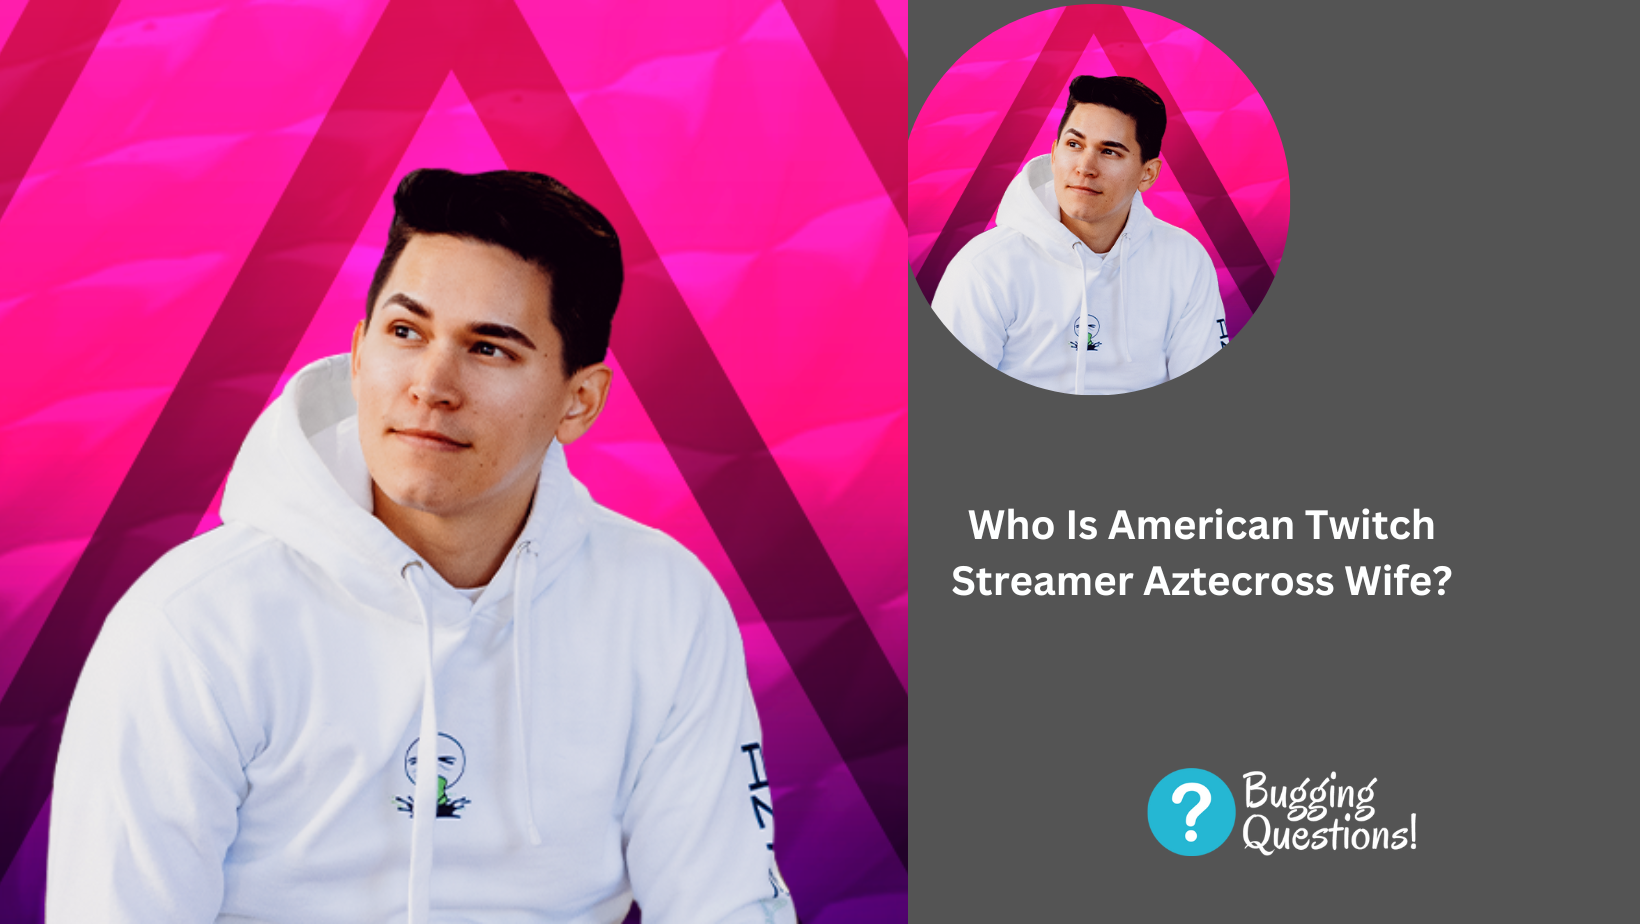 Who Is American Twitch Streamer Aztecross Wife?